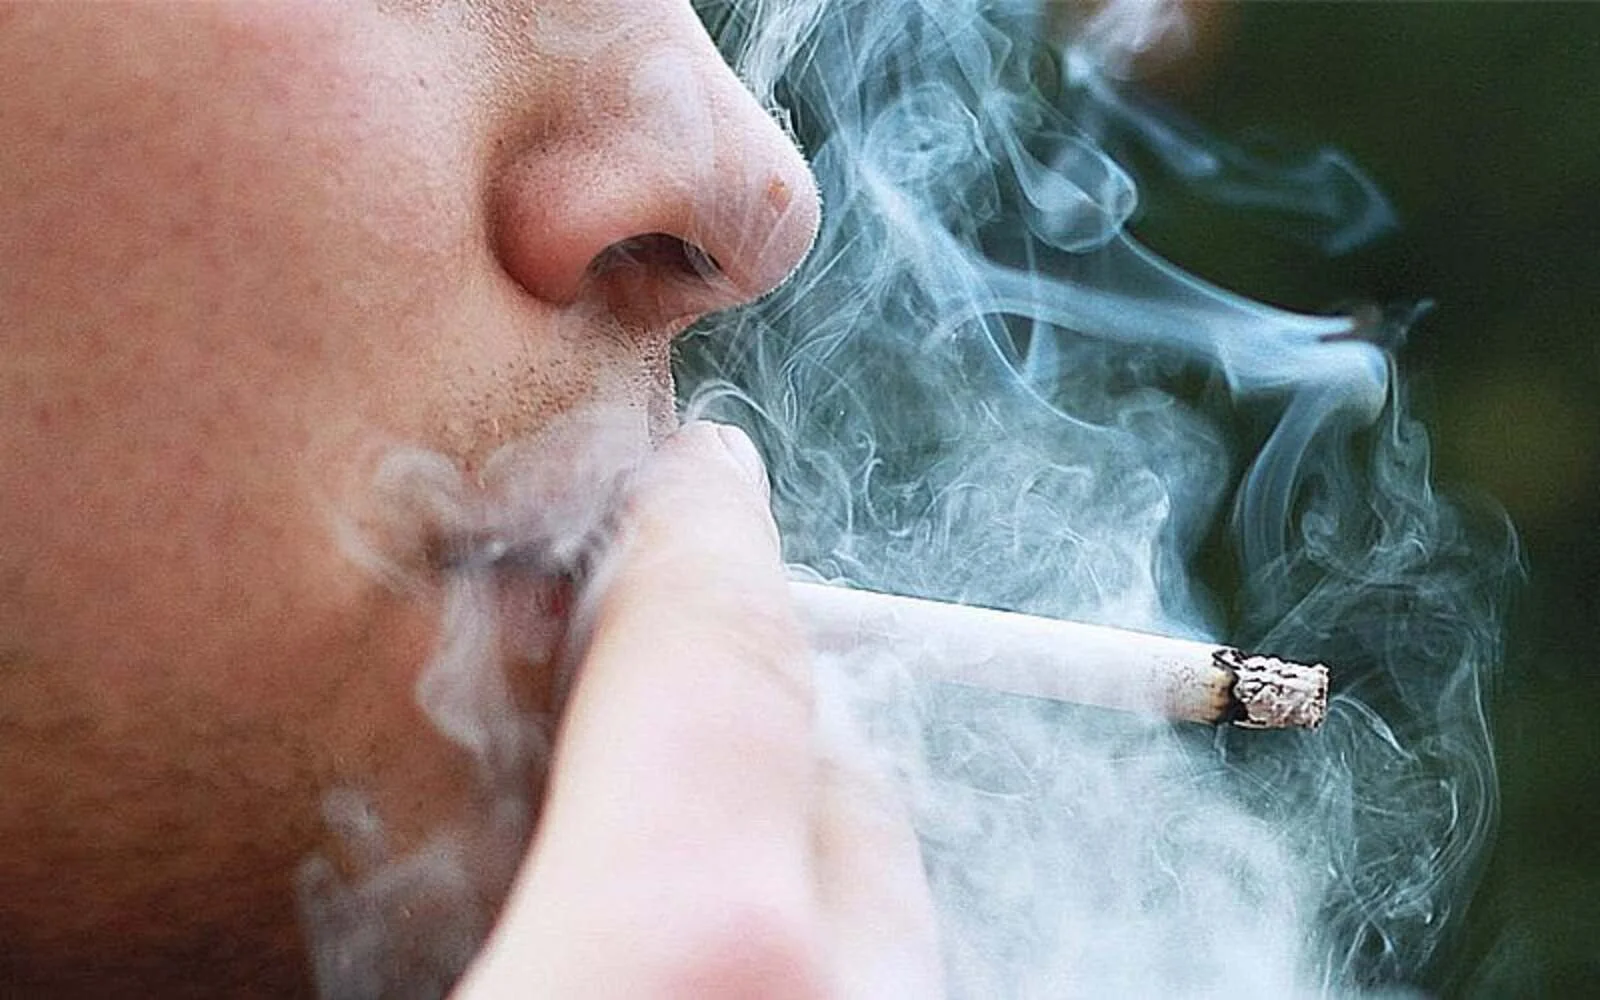 UK to introduce bill to phase out smoking among young